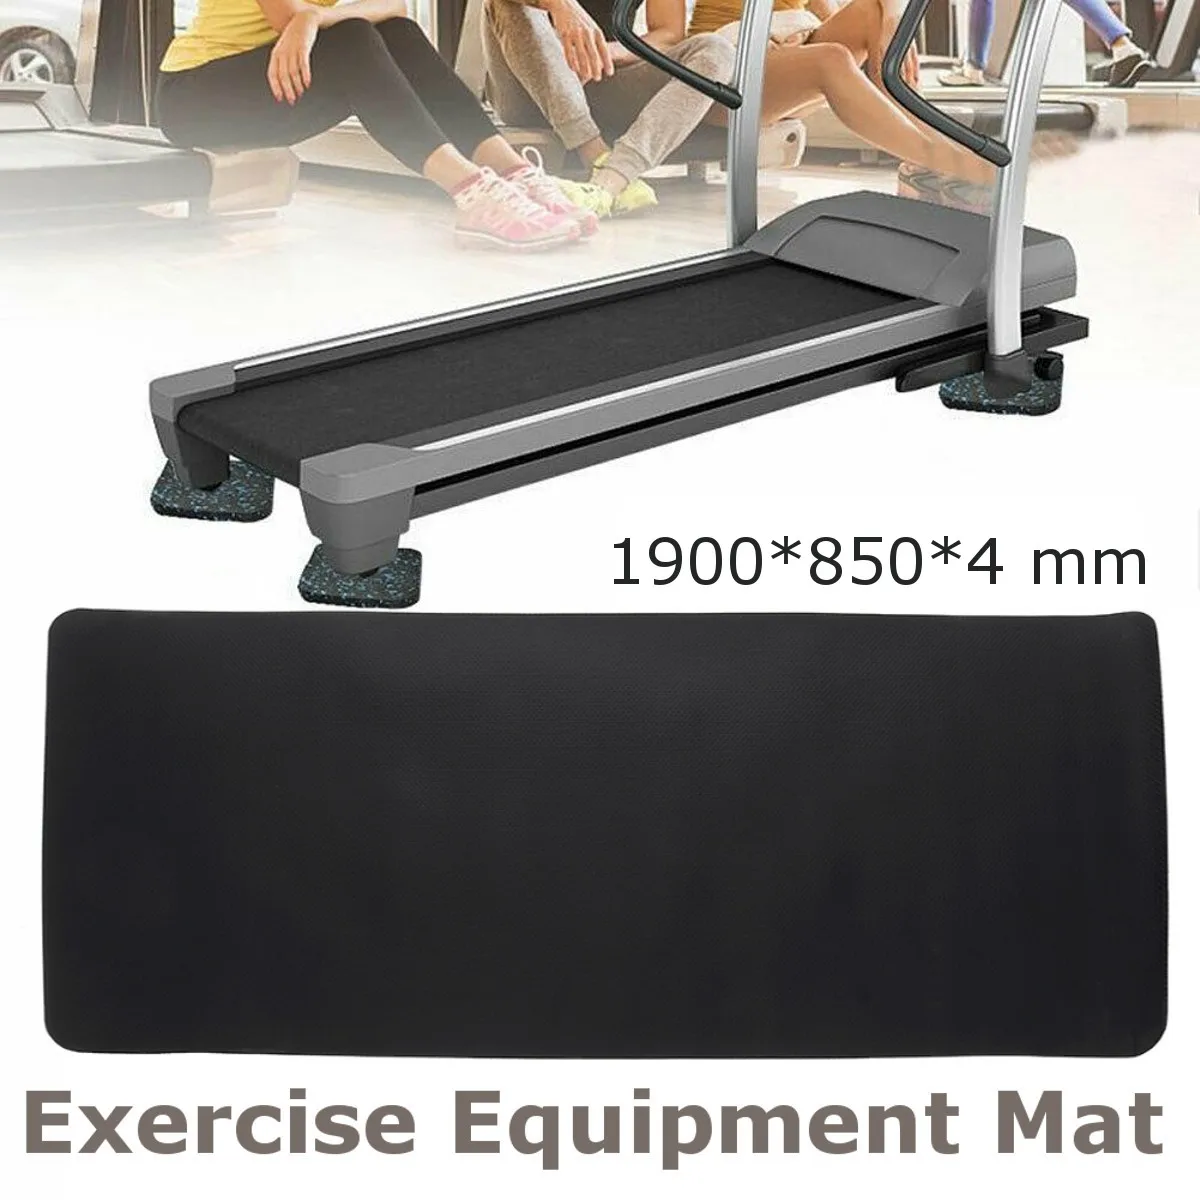 Details about   Exercise Mat Non-slip Pilates For Gym Yoga Treadmill Bike Protect Floo 